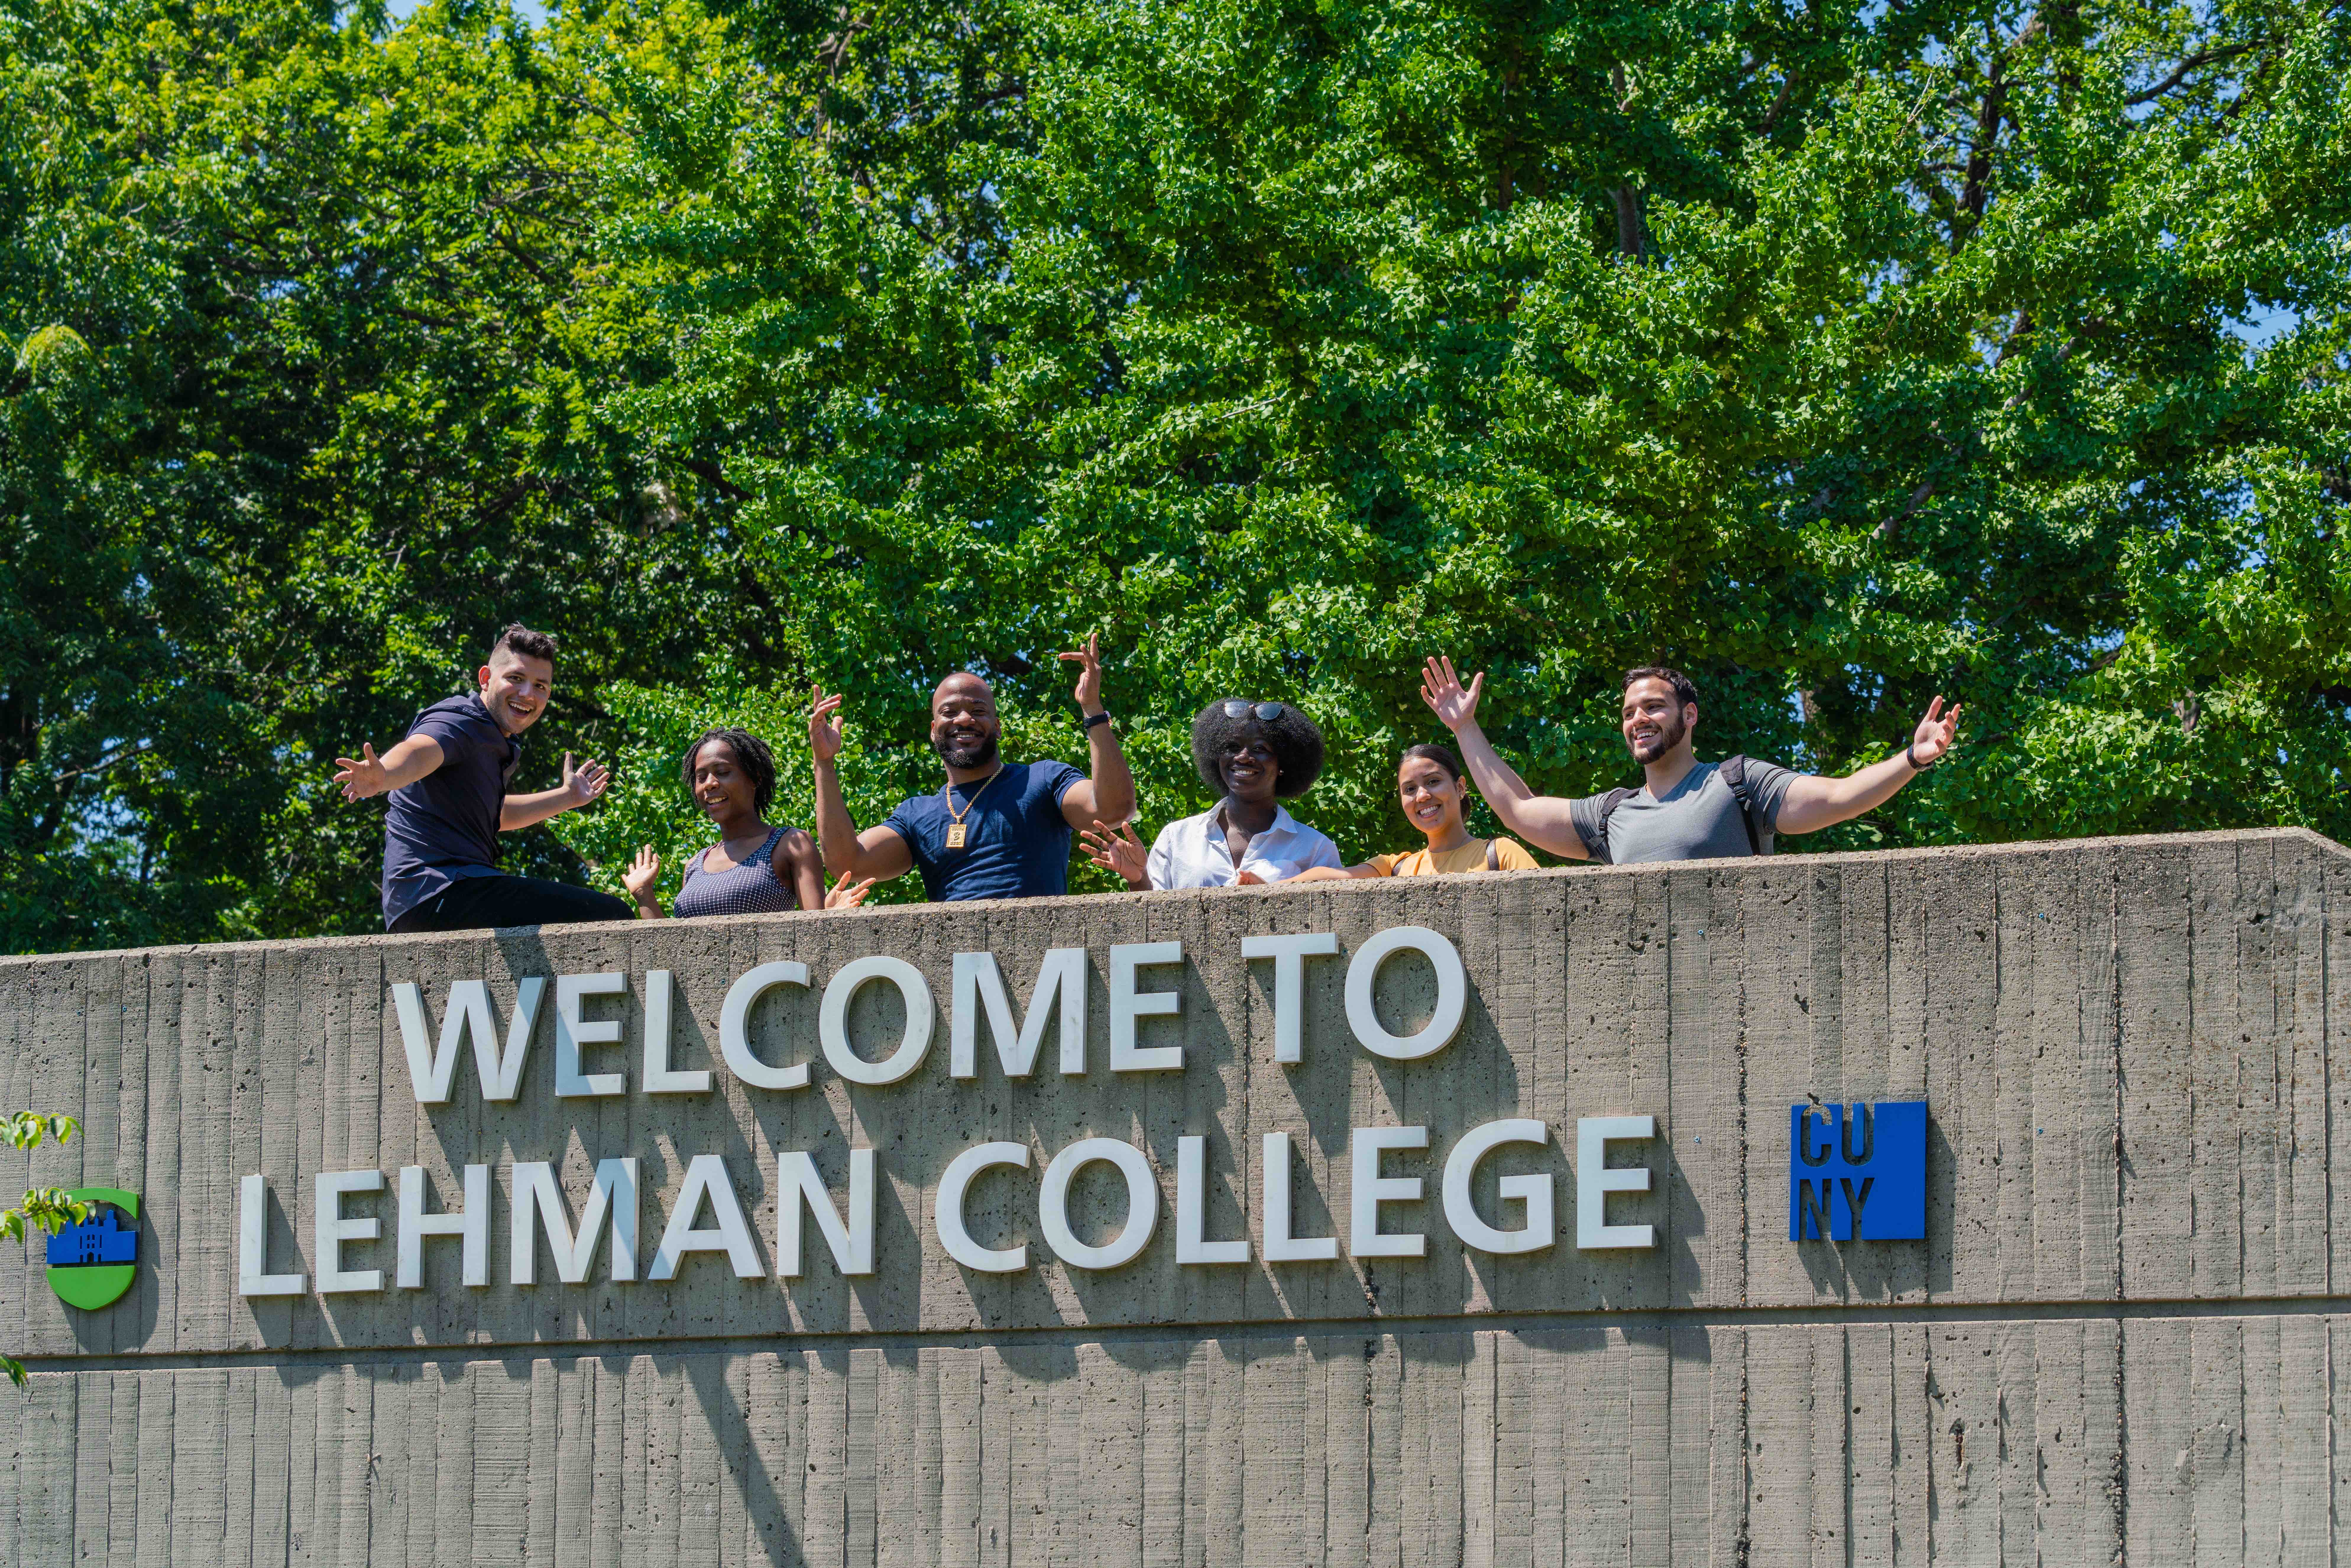 Students standing behind the Welcome to Lehman College sign and waving.